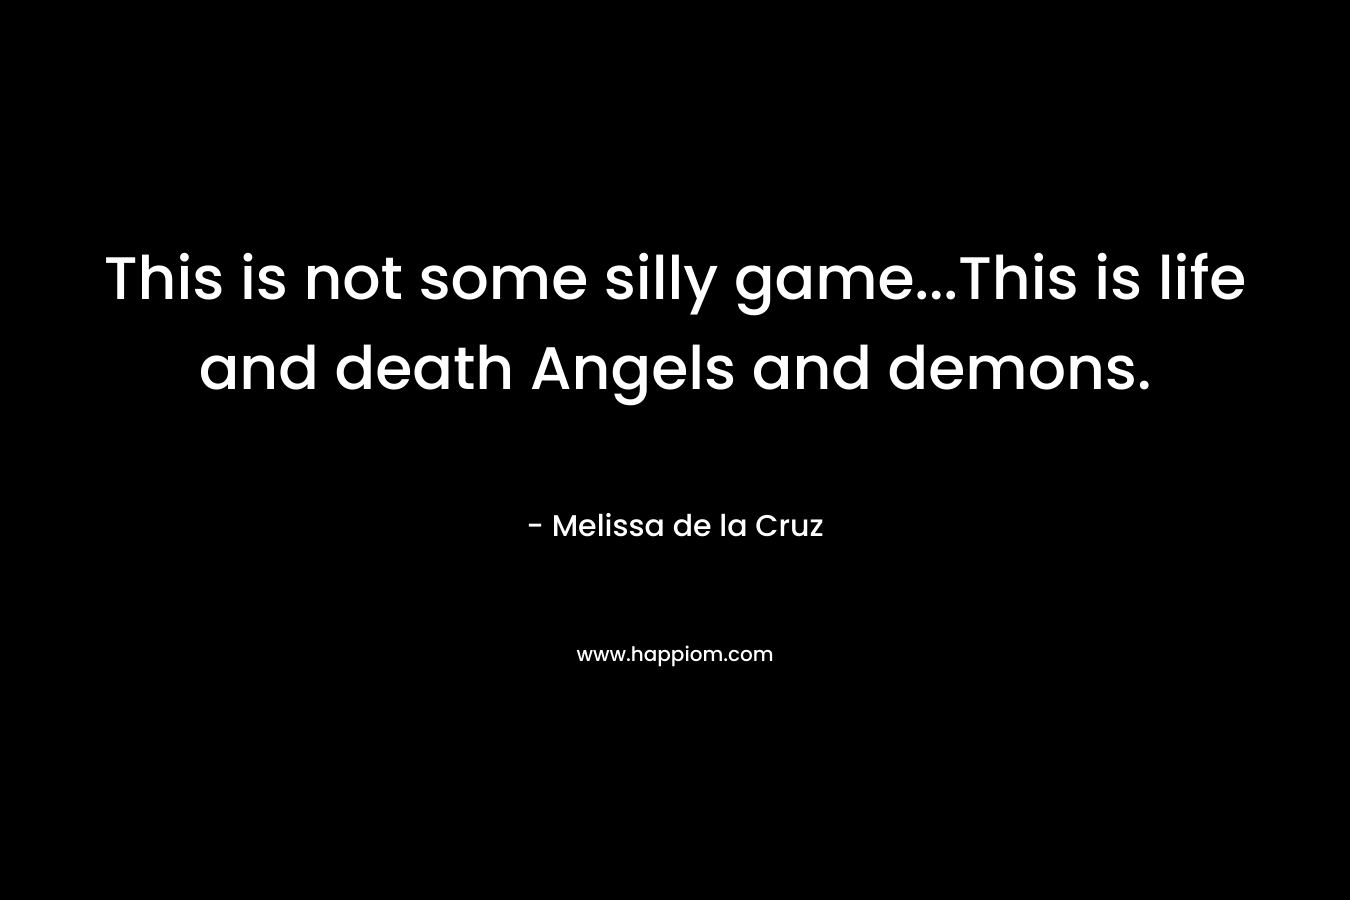 This is not some silly game…This is life and death Angels and demons. – Melissa de la Cruz